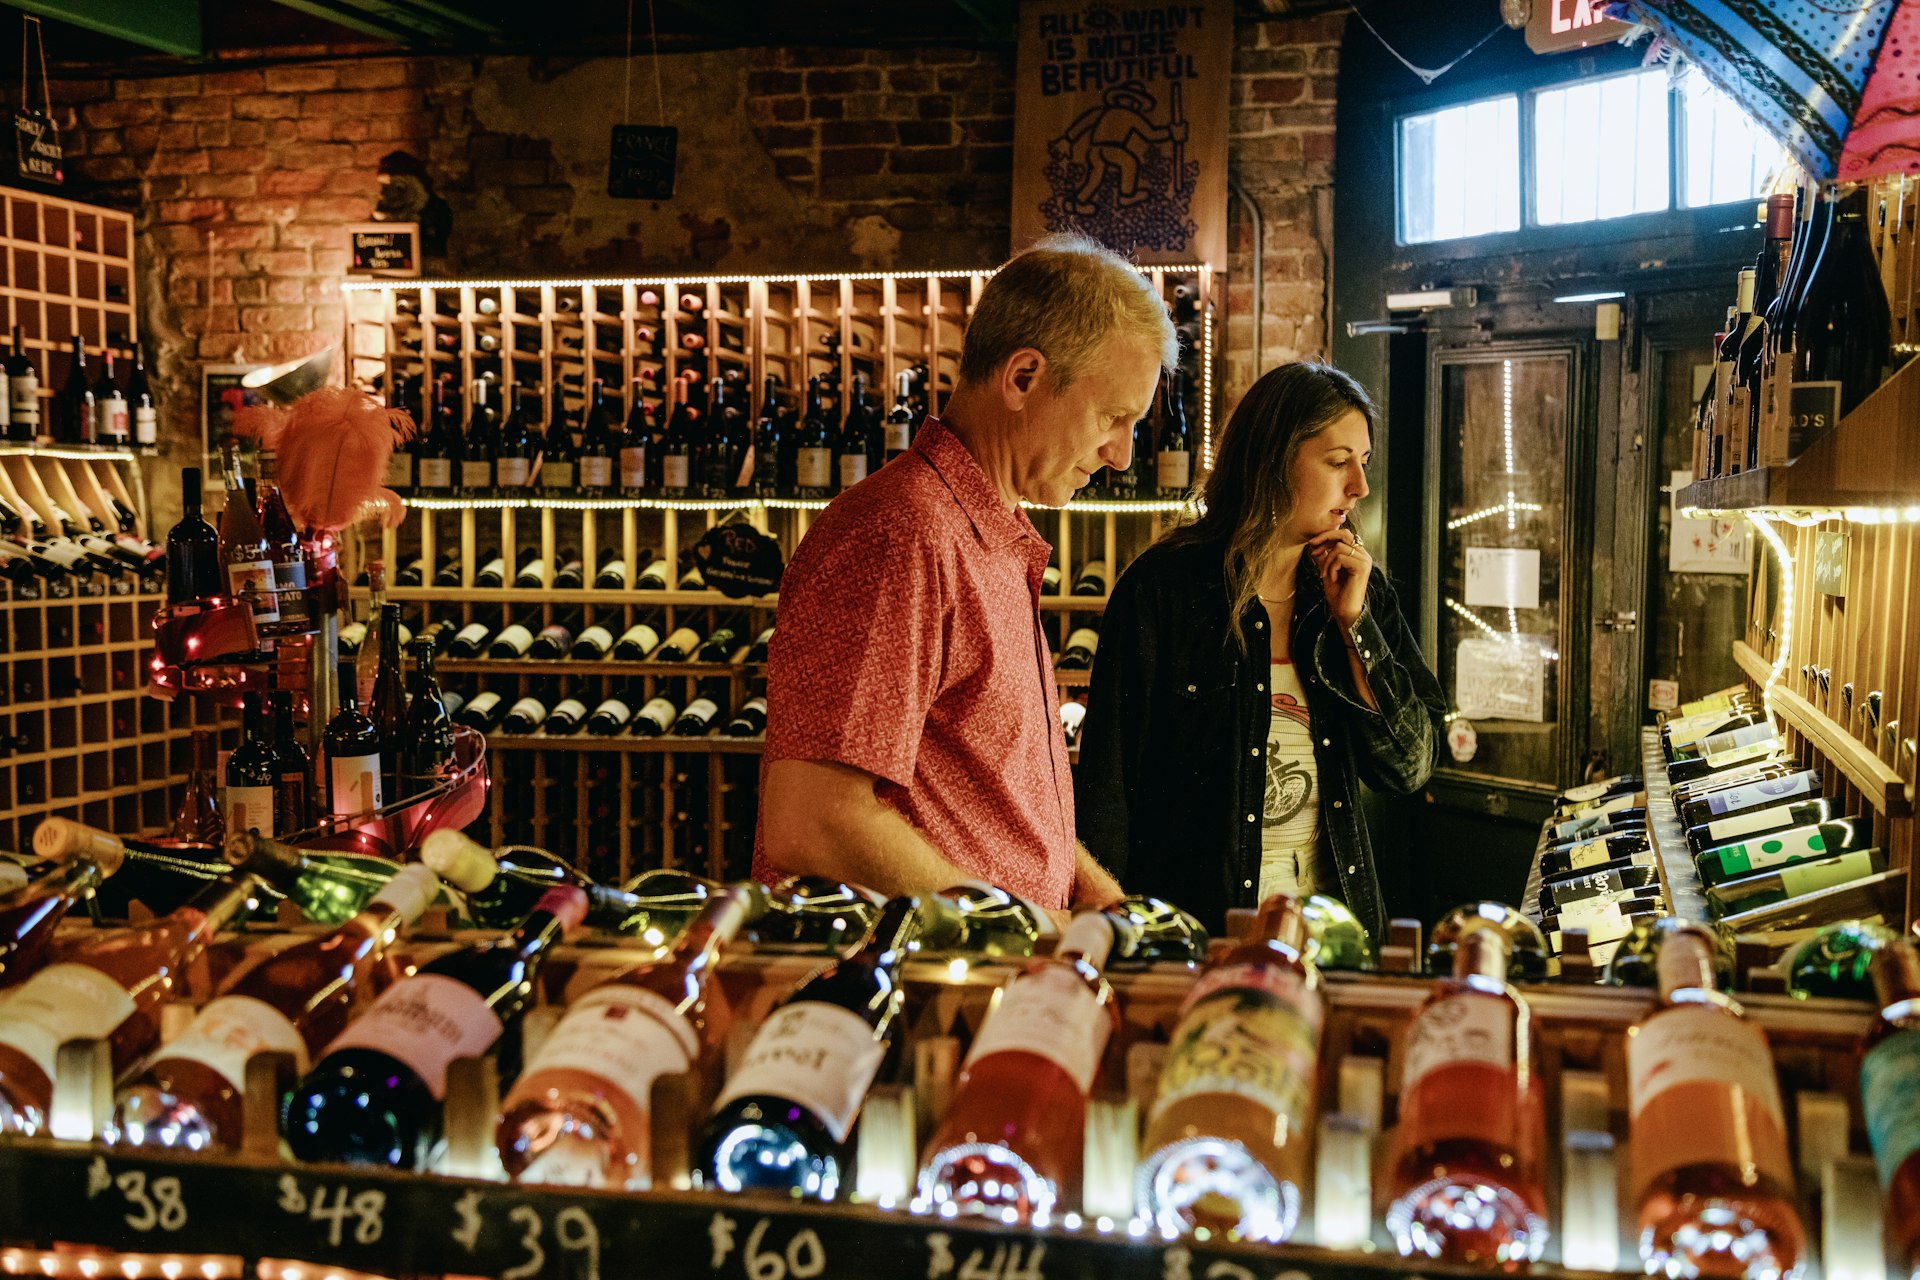 An employee helps a customer find a bottle of wine in the wine shop at Bacchanal, a restaurant, wine bar, and venue located in the Bywater. A small speakeasy-style restaurant that started before Hurricane Katrina © Bryan Tarnowski / Lonely Planet